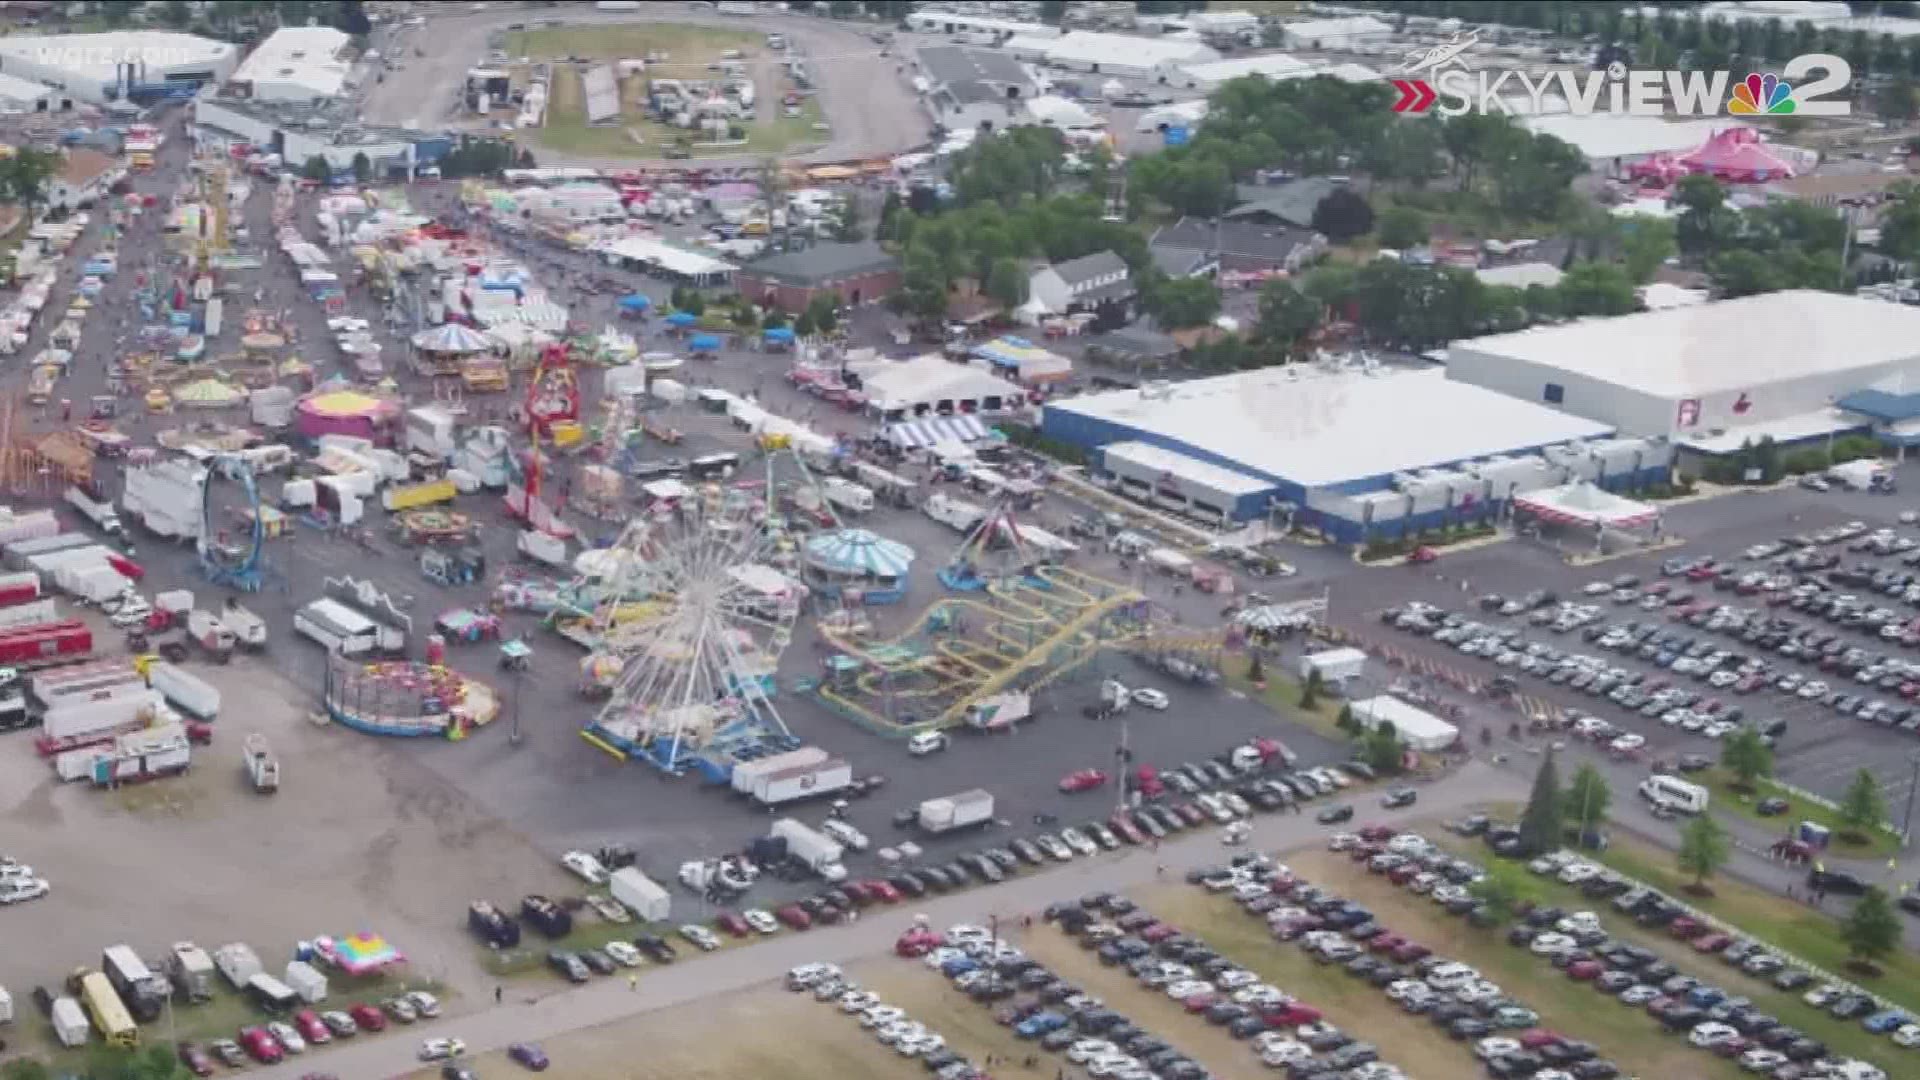 No Erie County Fair this year due to Covid 19